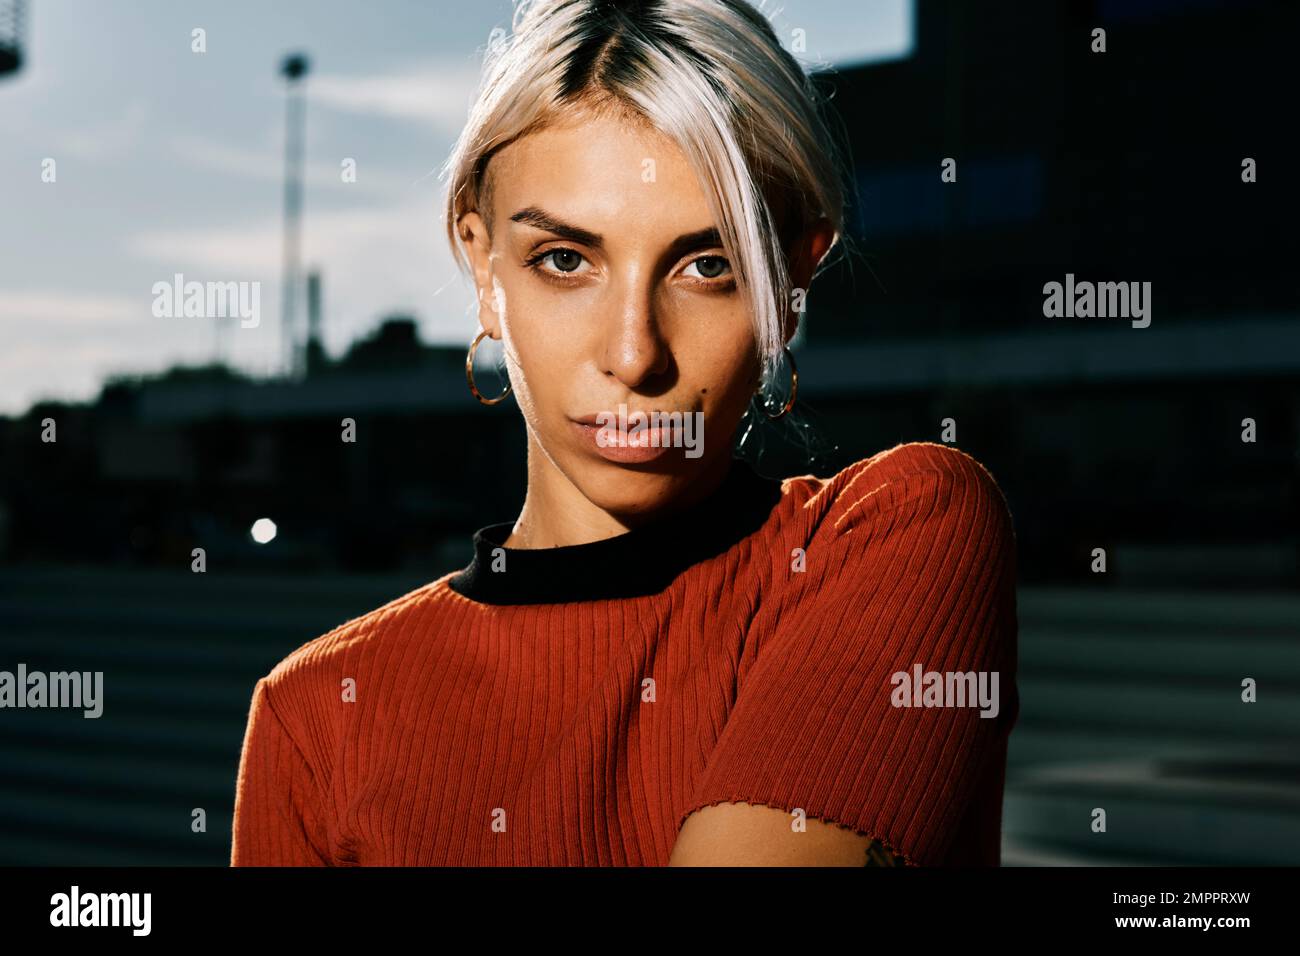 Woman looking at the camera while posing with her face lit outdoors. Stock Photo